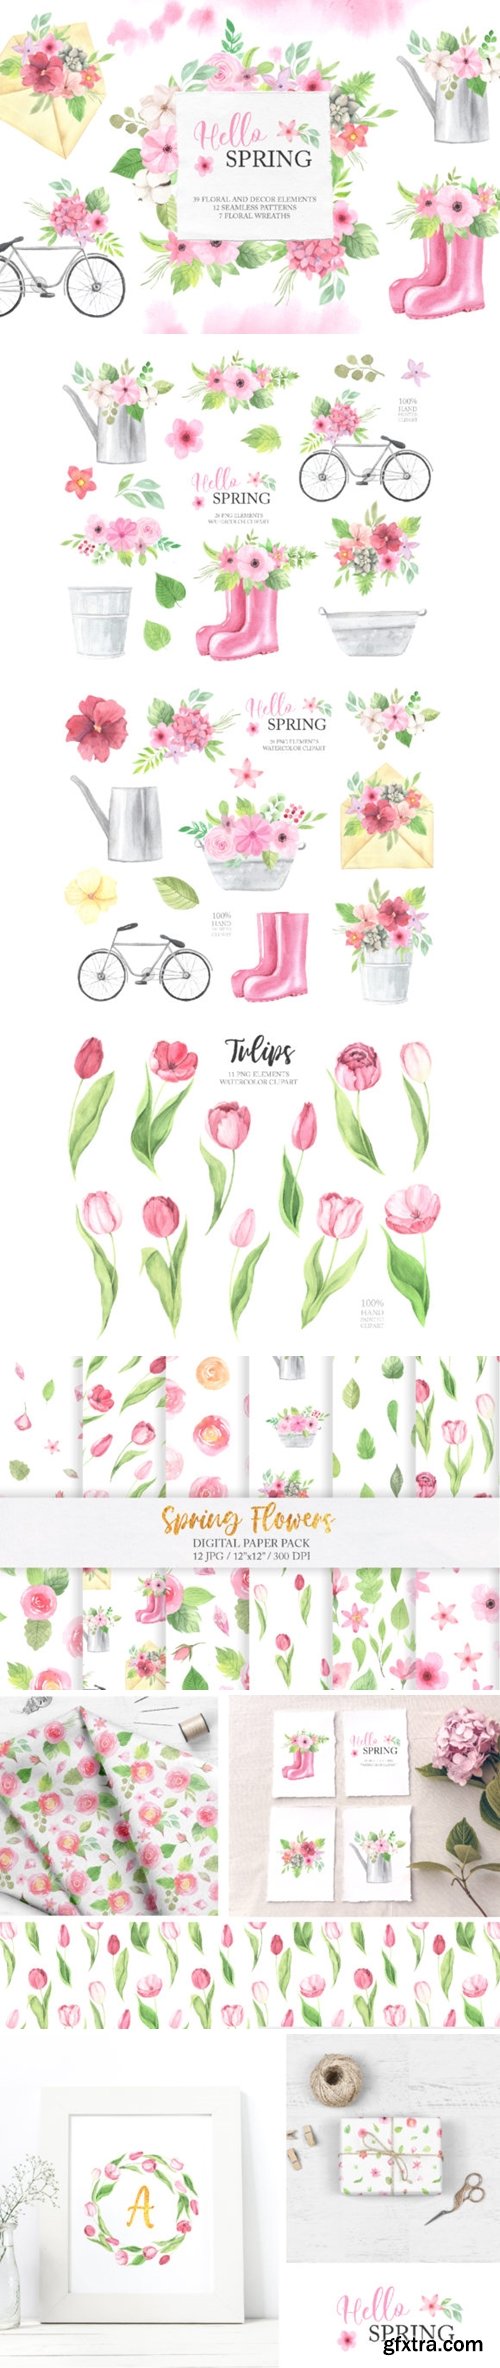 Watercolor Spring Floral Collection 3676809